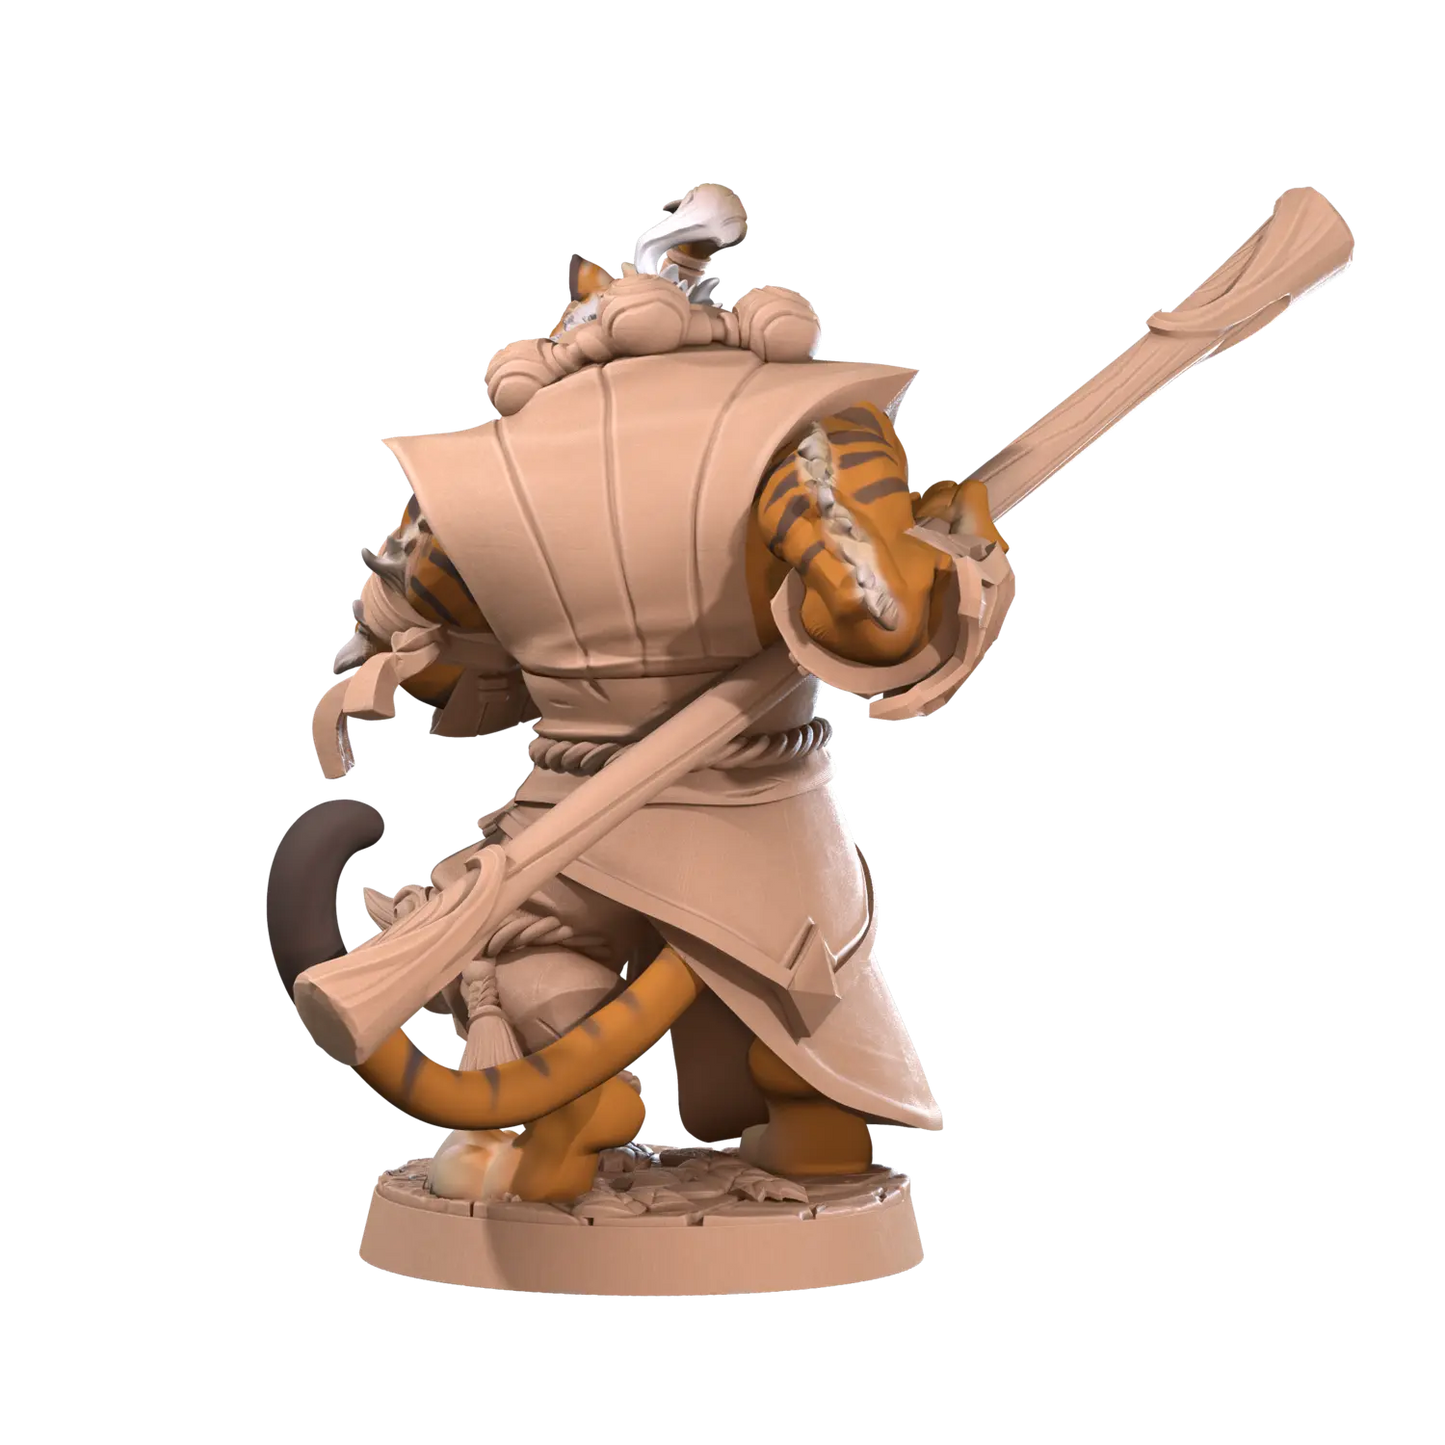 DnD Miniature - Monk - Tabaxi Ajax 01 Miniature - Monk - Tabaxi sold by DoubleHitShop